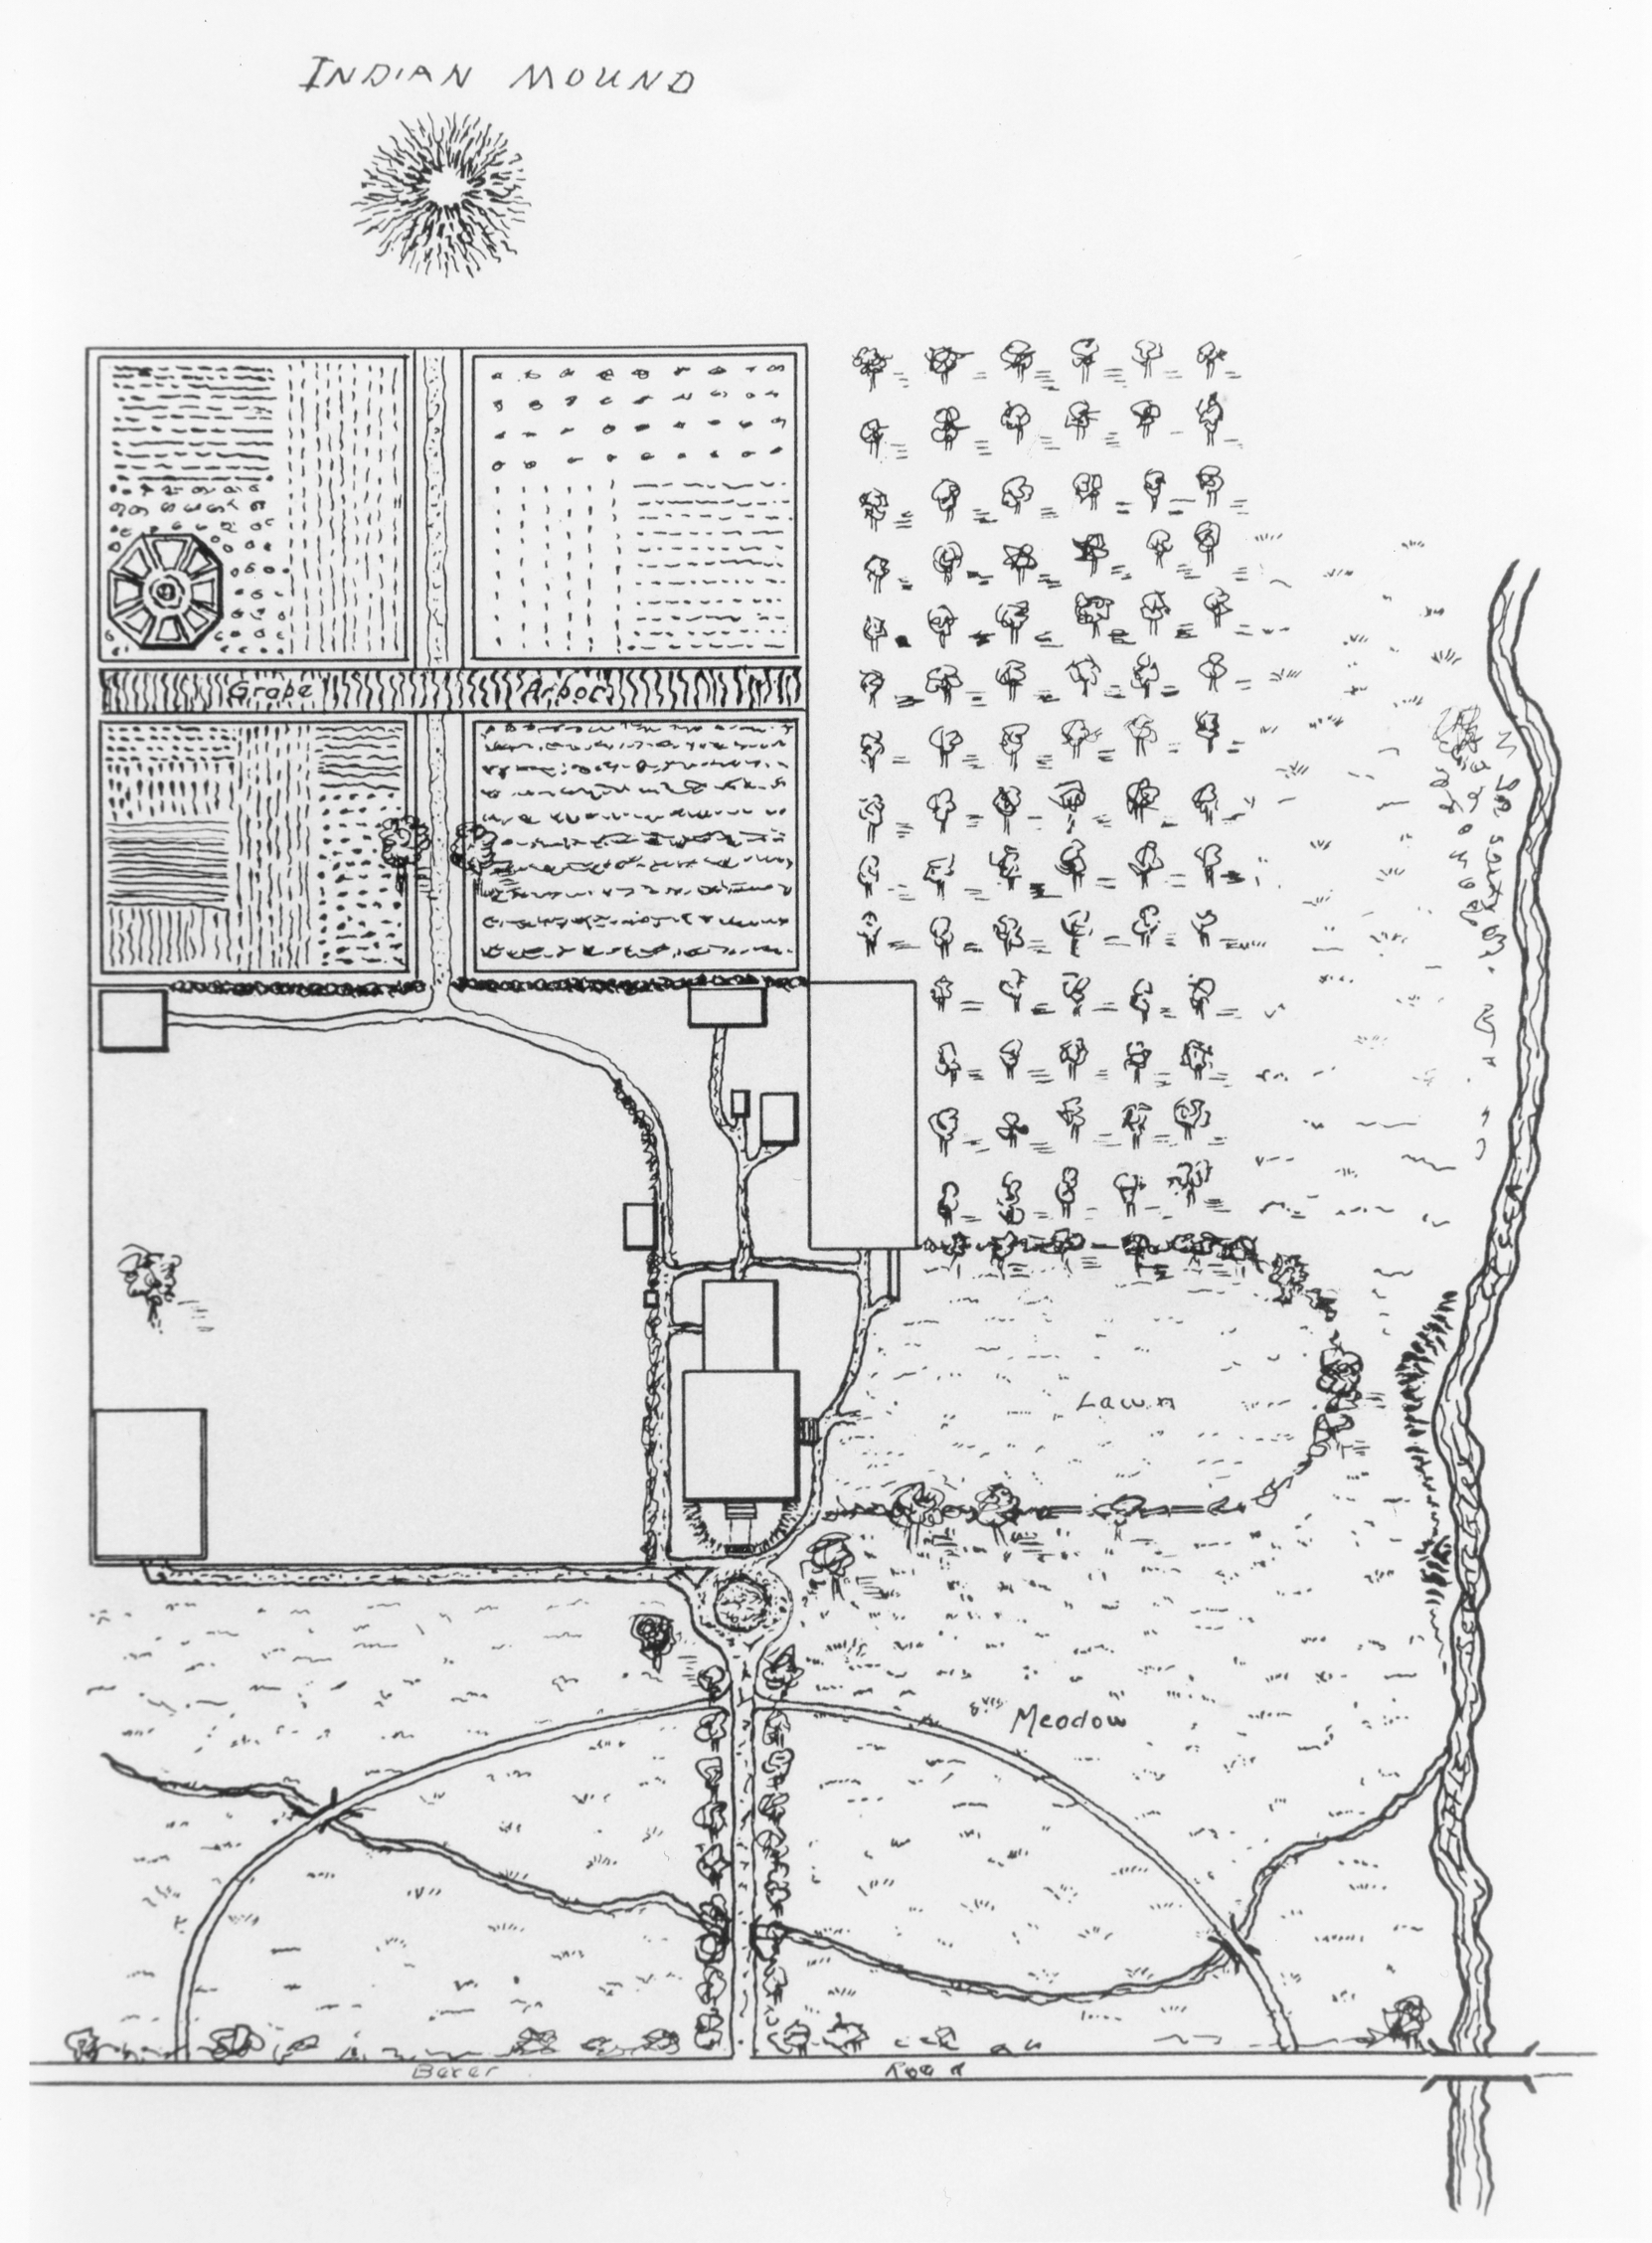 Anonymous, Garden Plan of "Newington" in Allegheny County, Pa, 1823, in Alice B. Lockwood, Gardens of Colony and State (1931), vol. 1, p. 380.